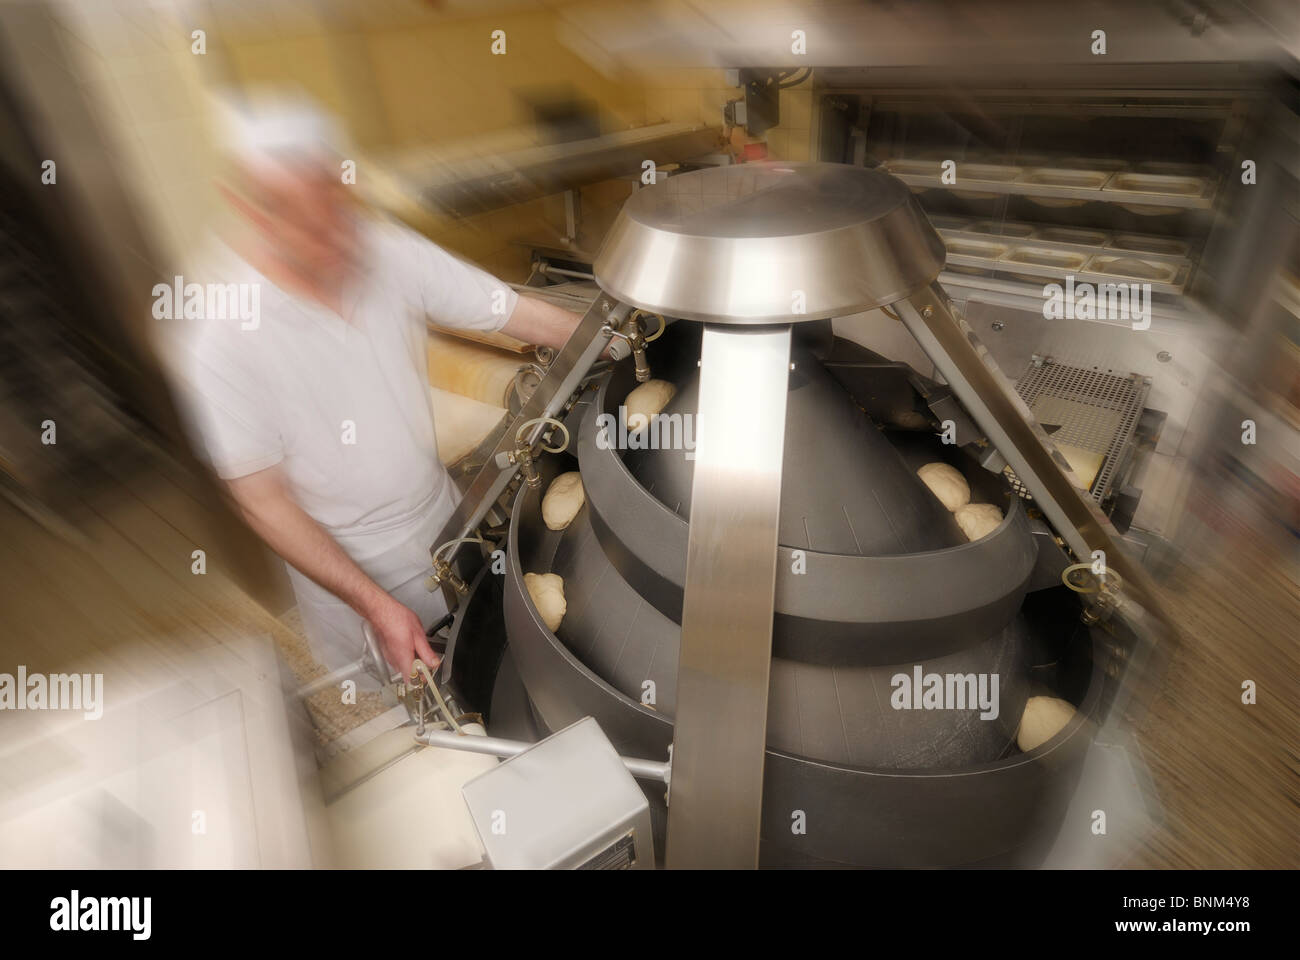 pastry process to bread, machine preparing pastry to bread blanks, blurred baker Stock Photo